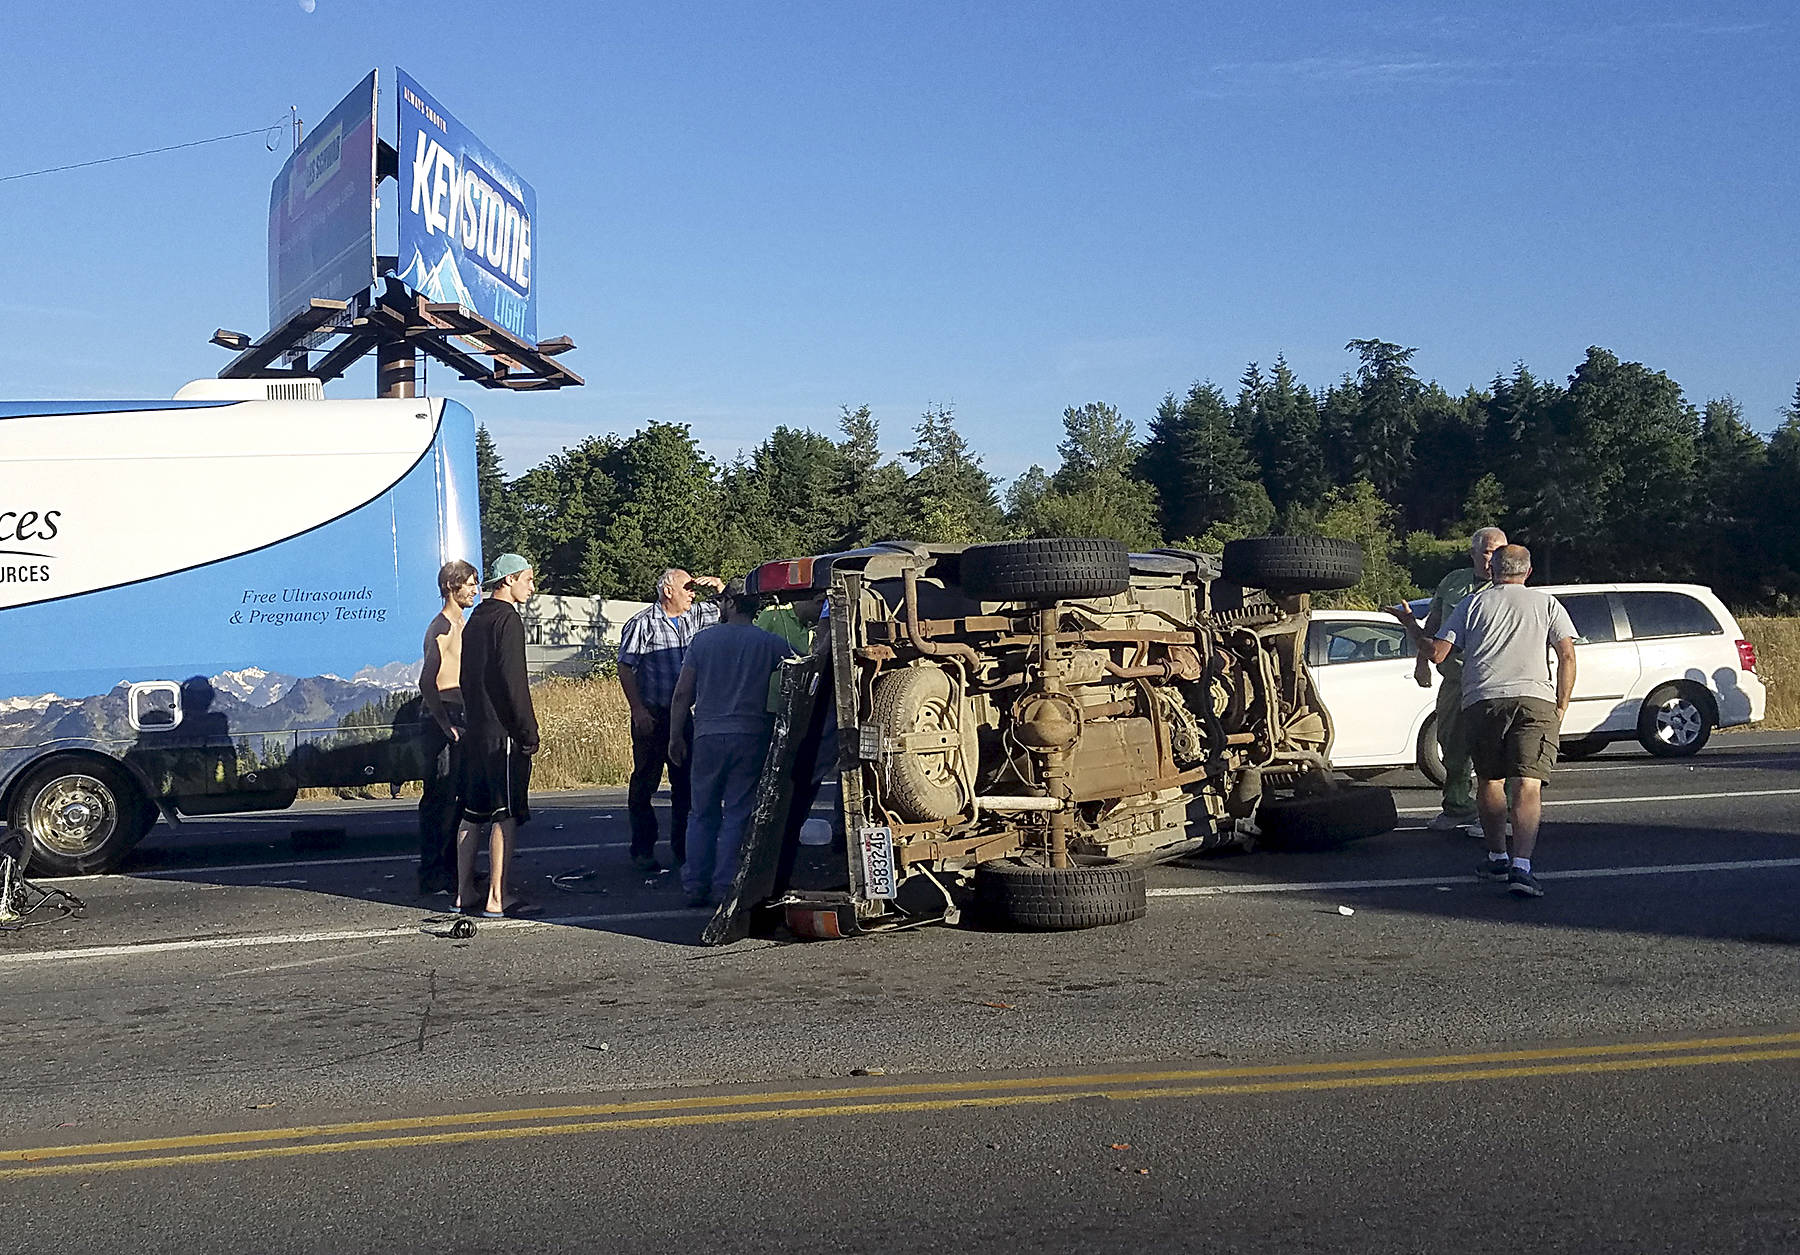 A 1997 Ford Ranger flipped at about 7:40 p.m. Tuesday at U.S. Highway 101 and Kolonels Way east of PortAngeles. (Jesse Major/Peninsula Daily News)